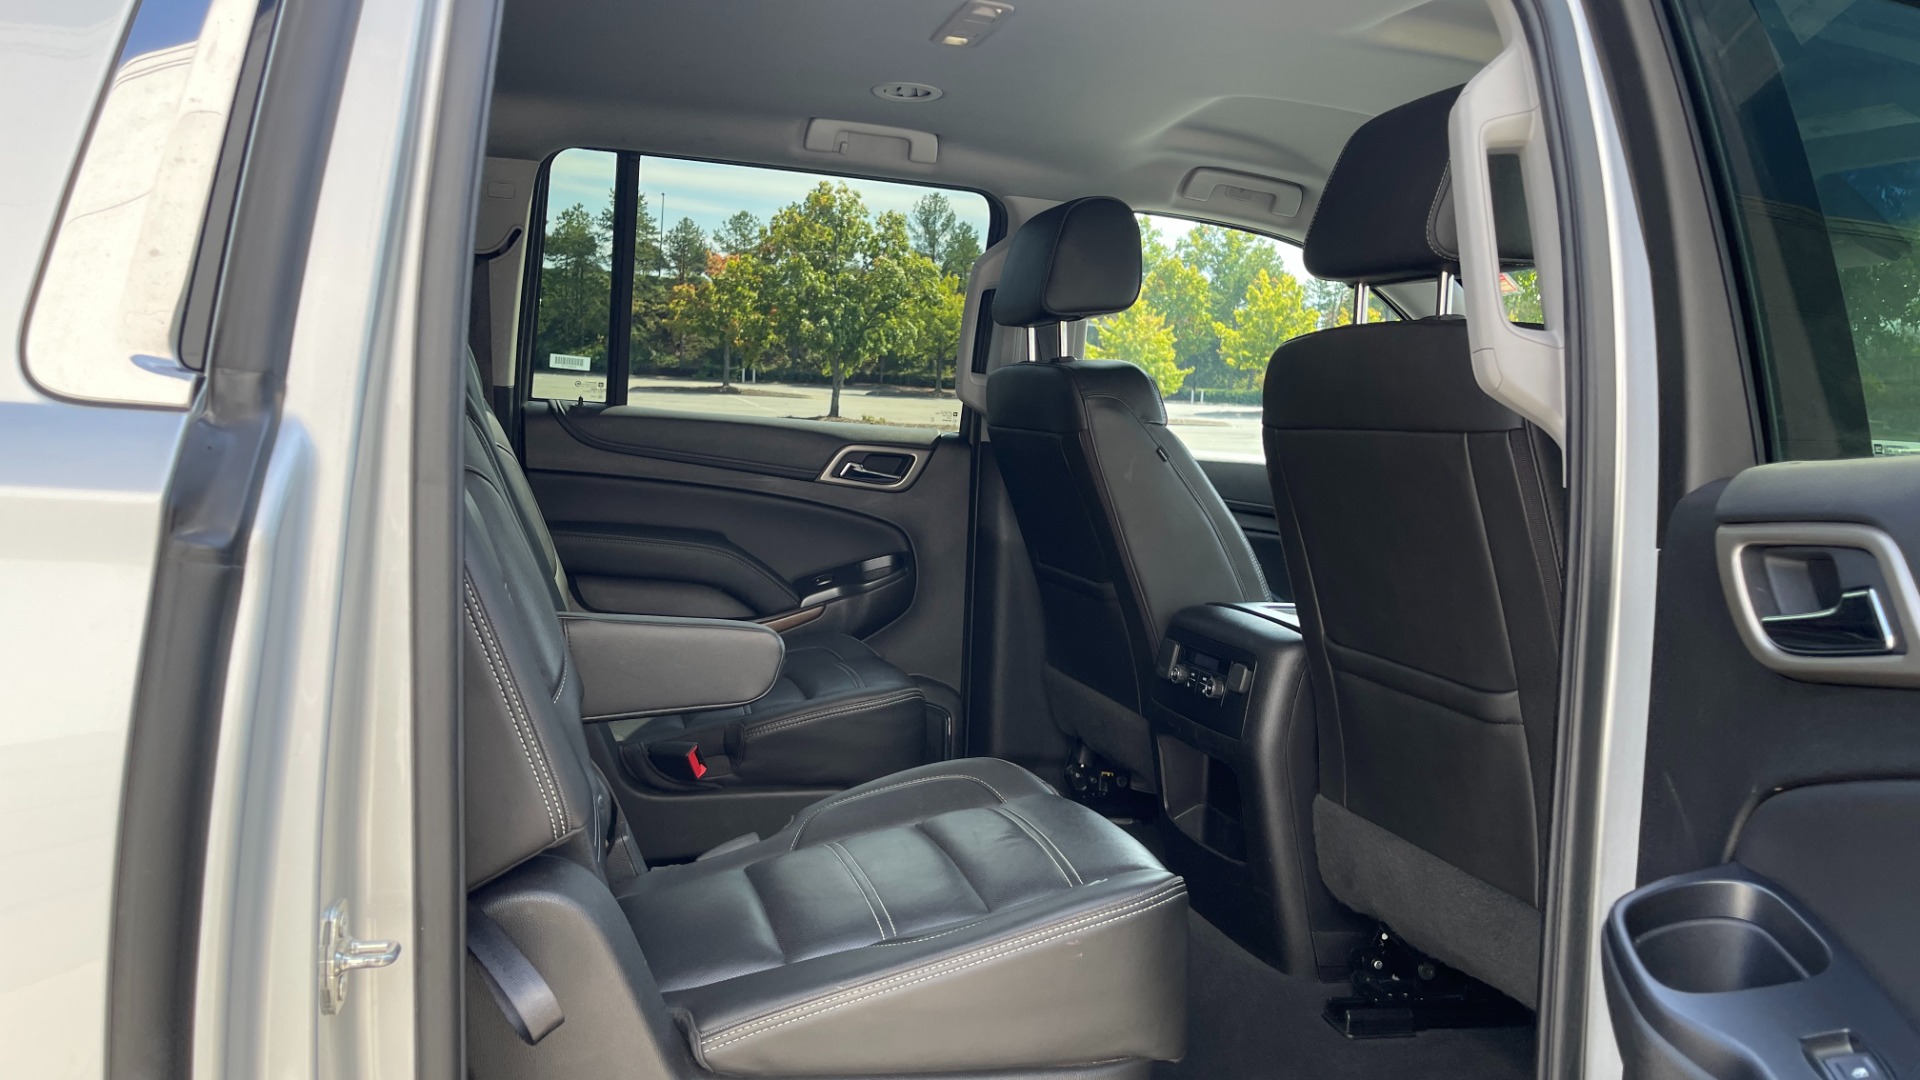 Used 2019 GMC Yukon XL DENALI / LEATHER / 4WD / CAPTAINS CHAIRS / 3 ROW SEATING for sale $55,000 at Formula Imports in Charlotte NC 28227 26